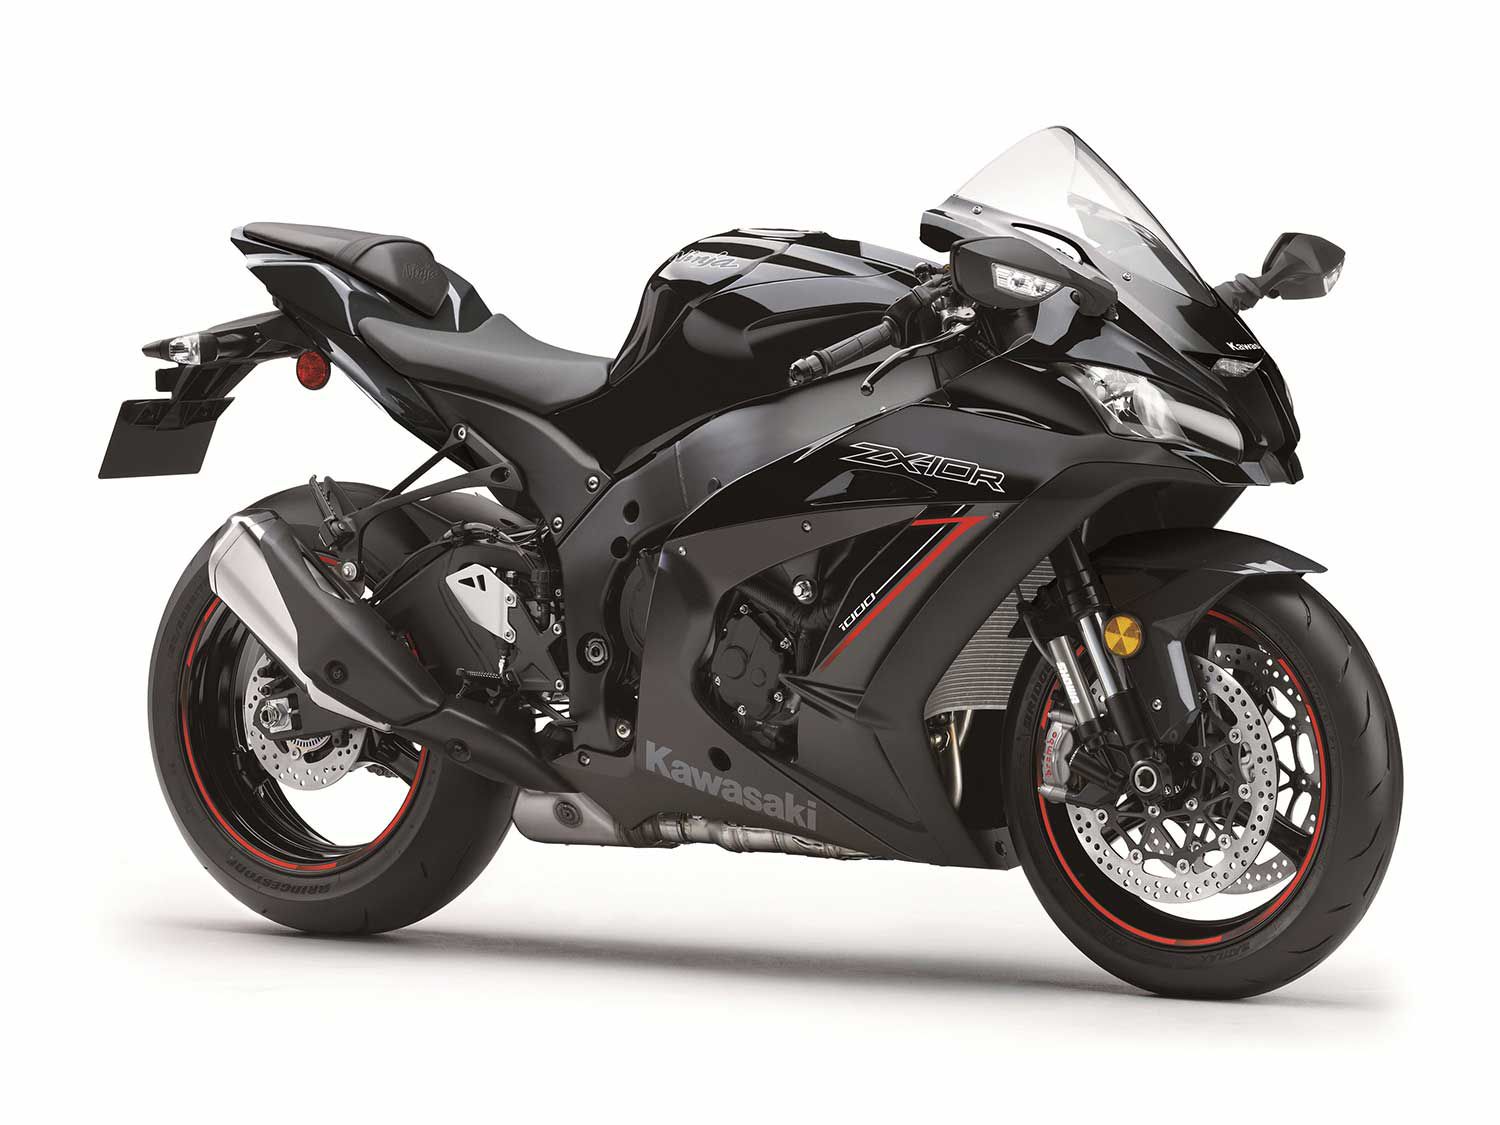 The Kawasaki Ninja ZX-10R is one of the most competitively priced literbikes around today.